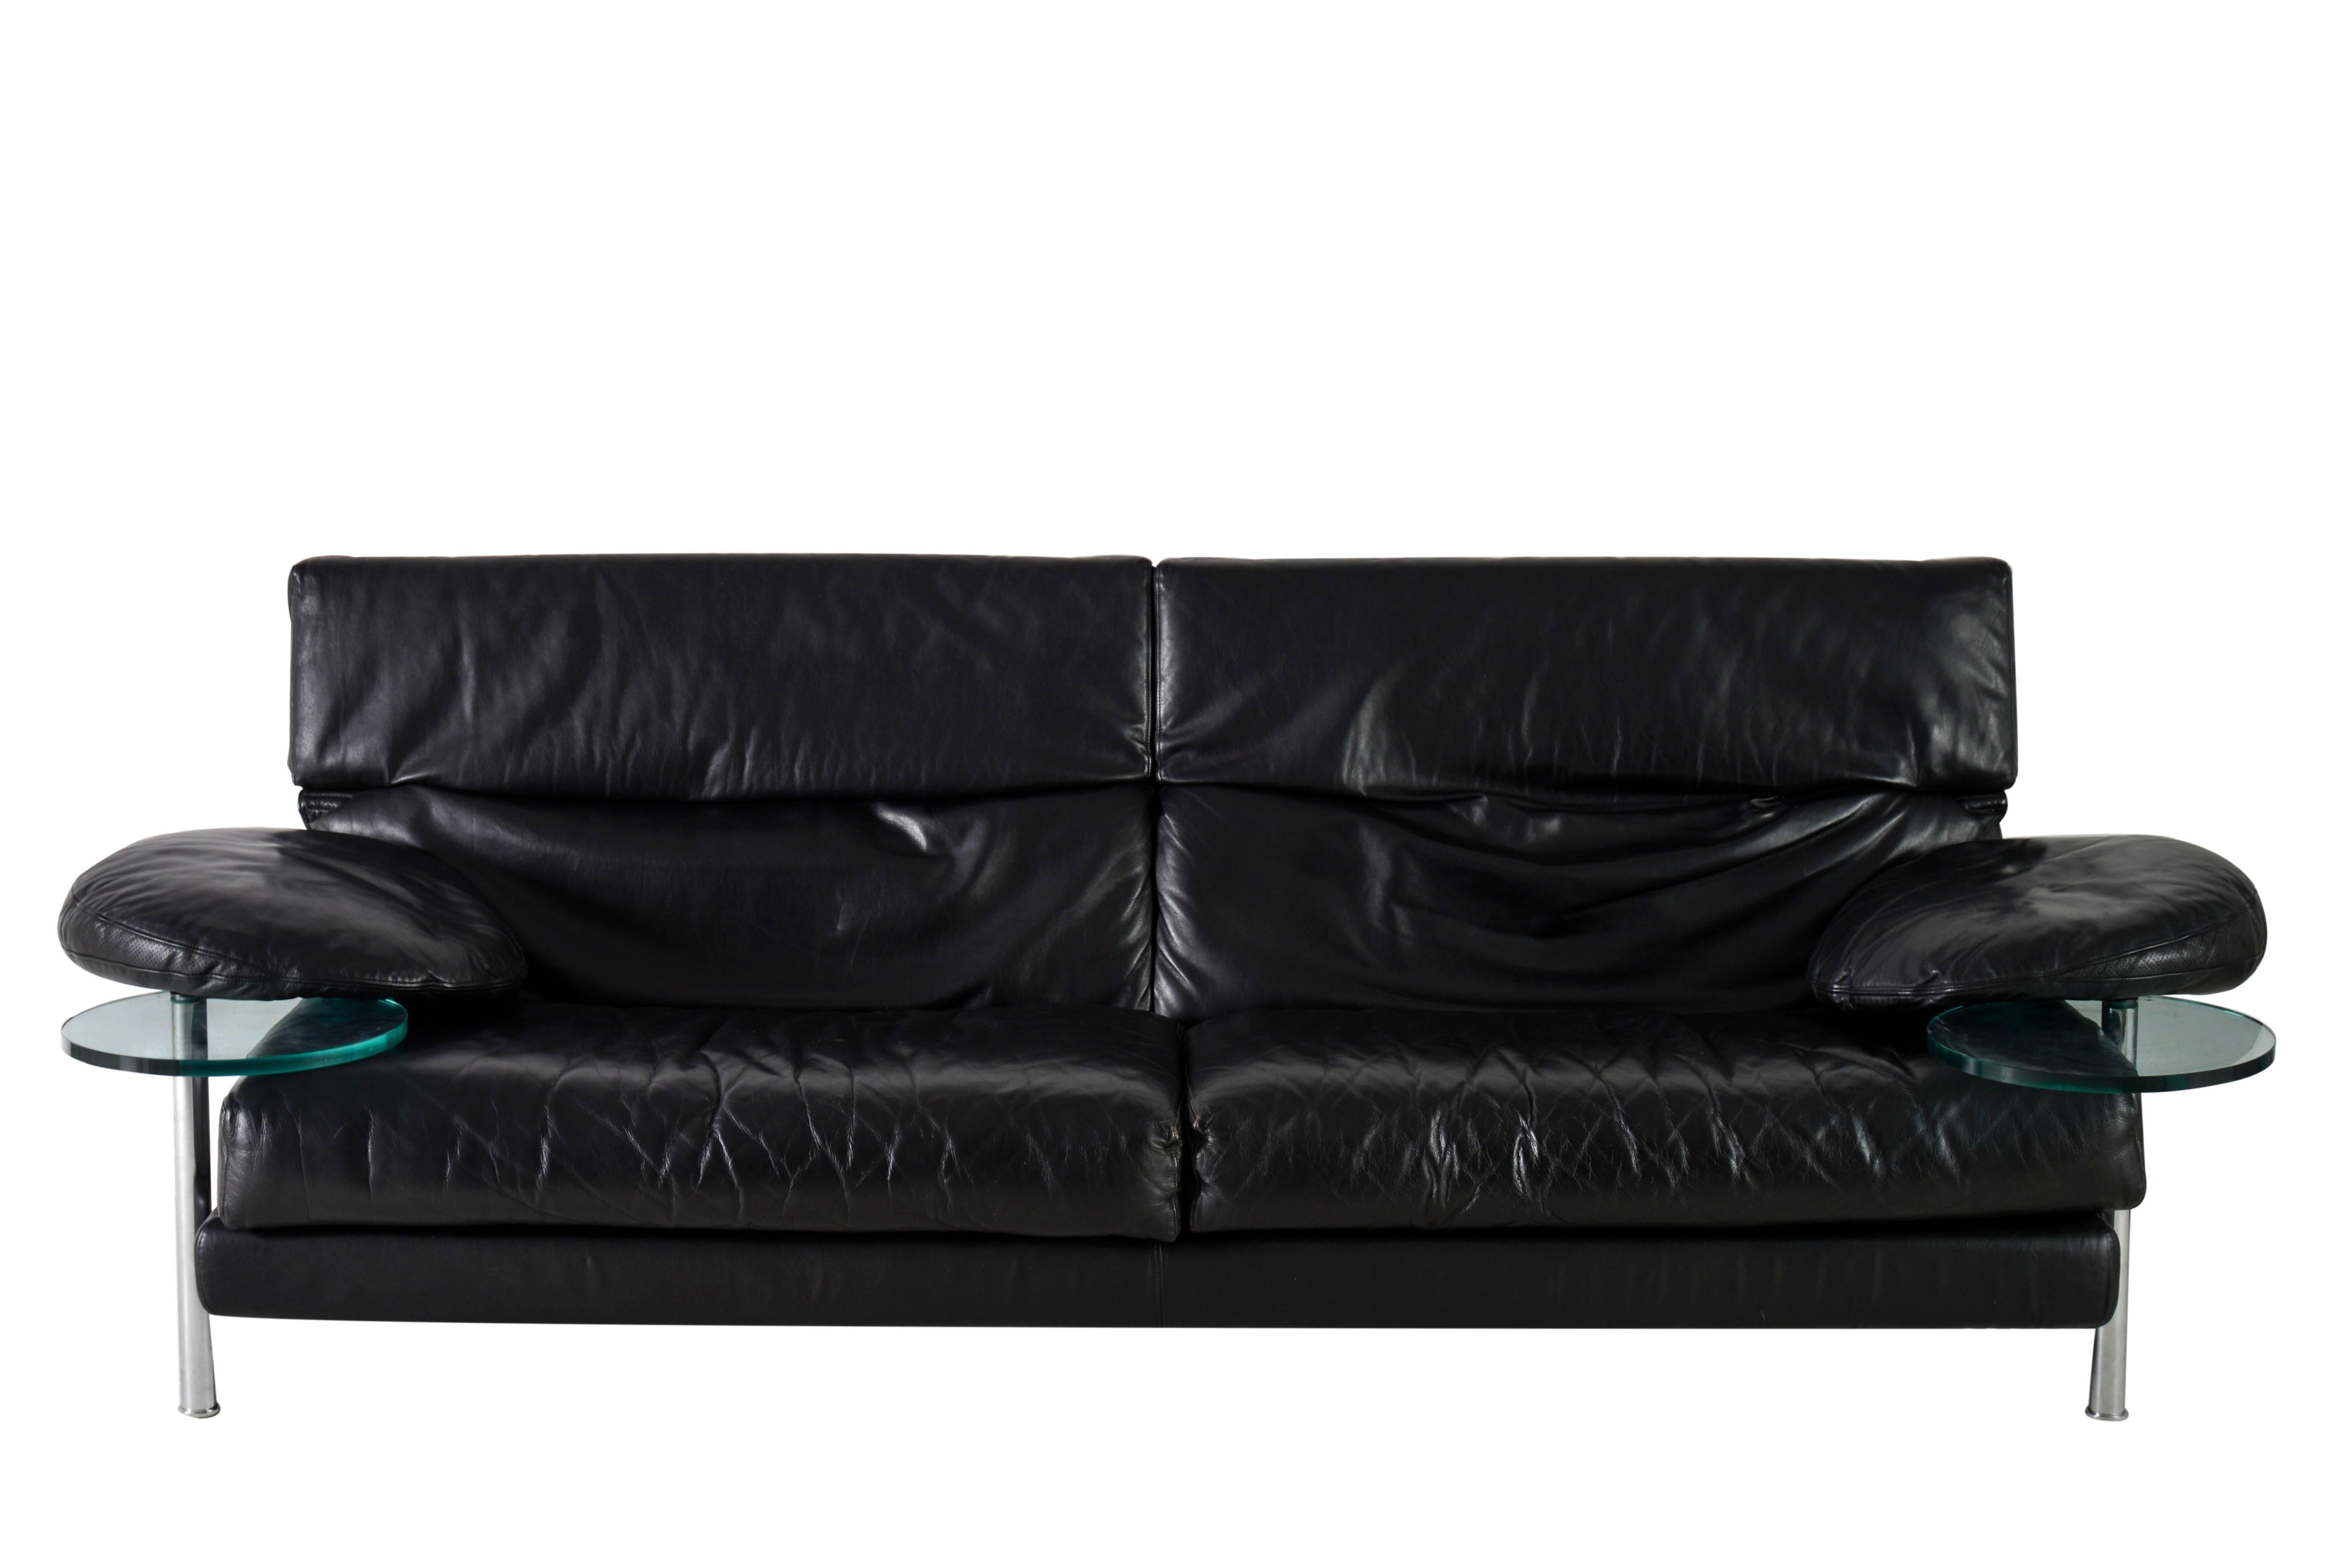 B&B Italia Arca sofa with right and left armrest provided with transparent glass serving tables which swing out from under the armrest. Framework made of structural steel embedded in cold foamed polyurethane and perforated black leather. The